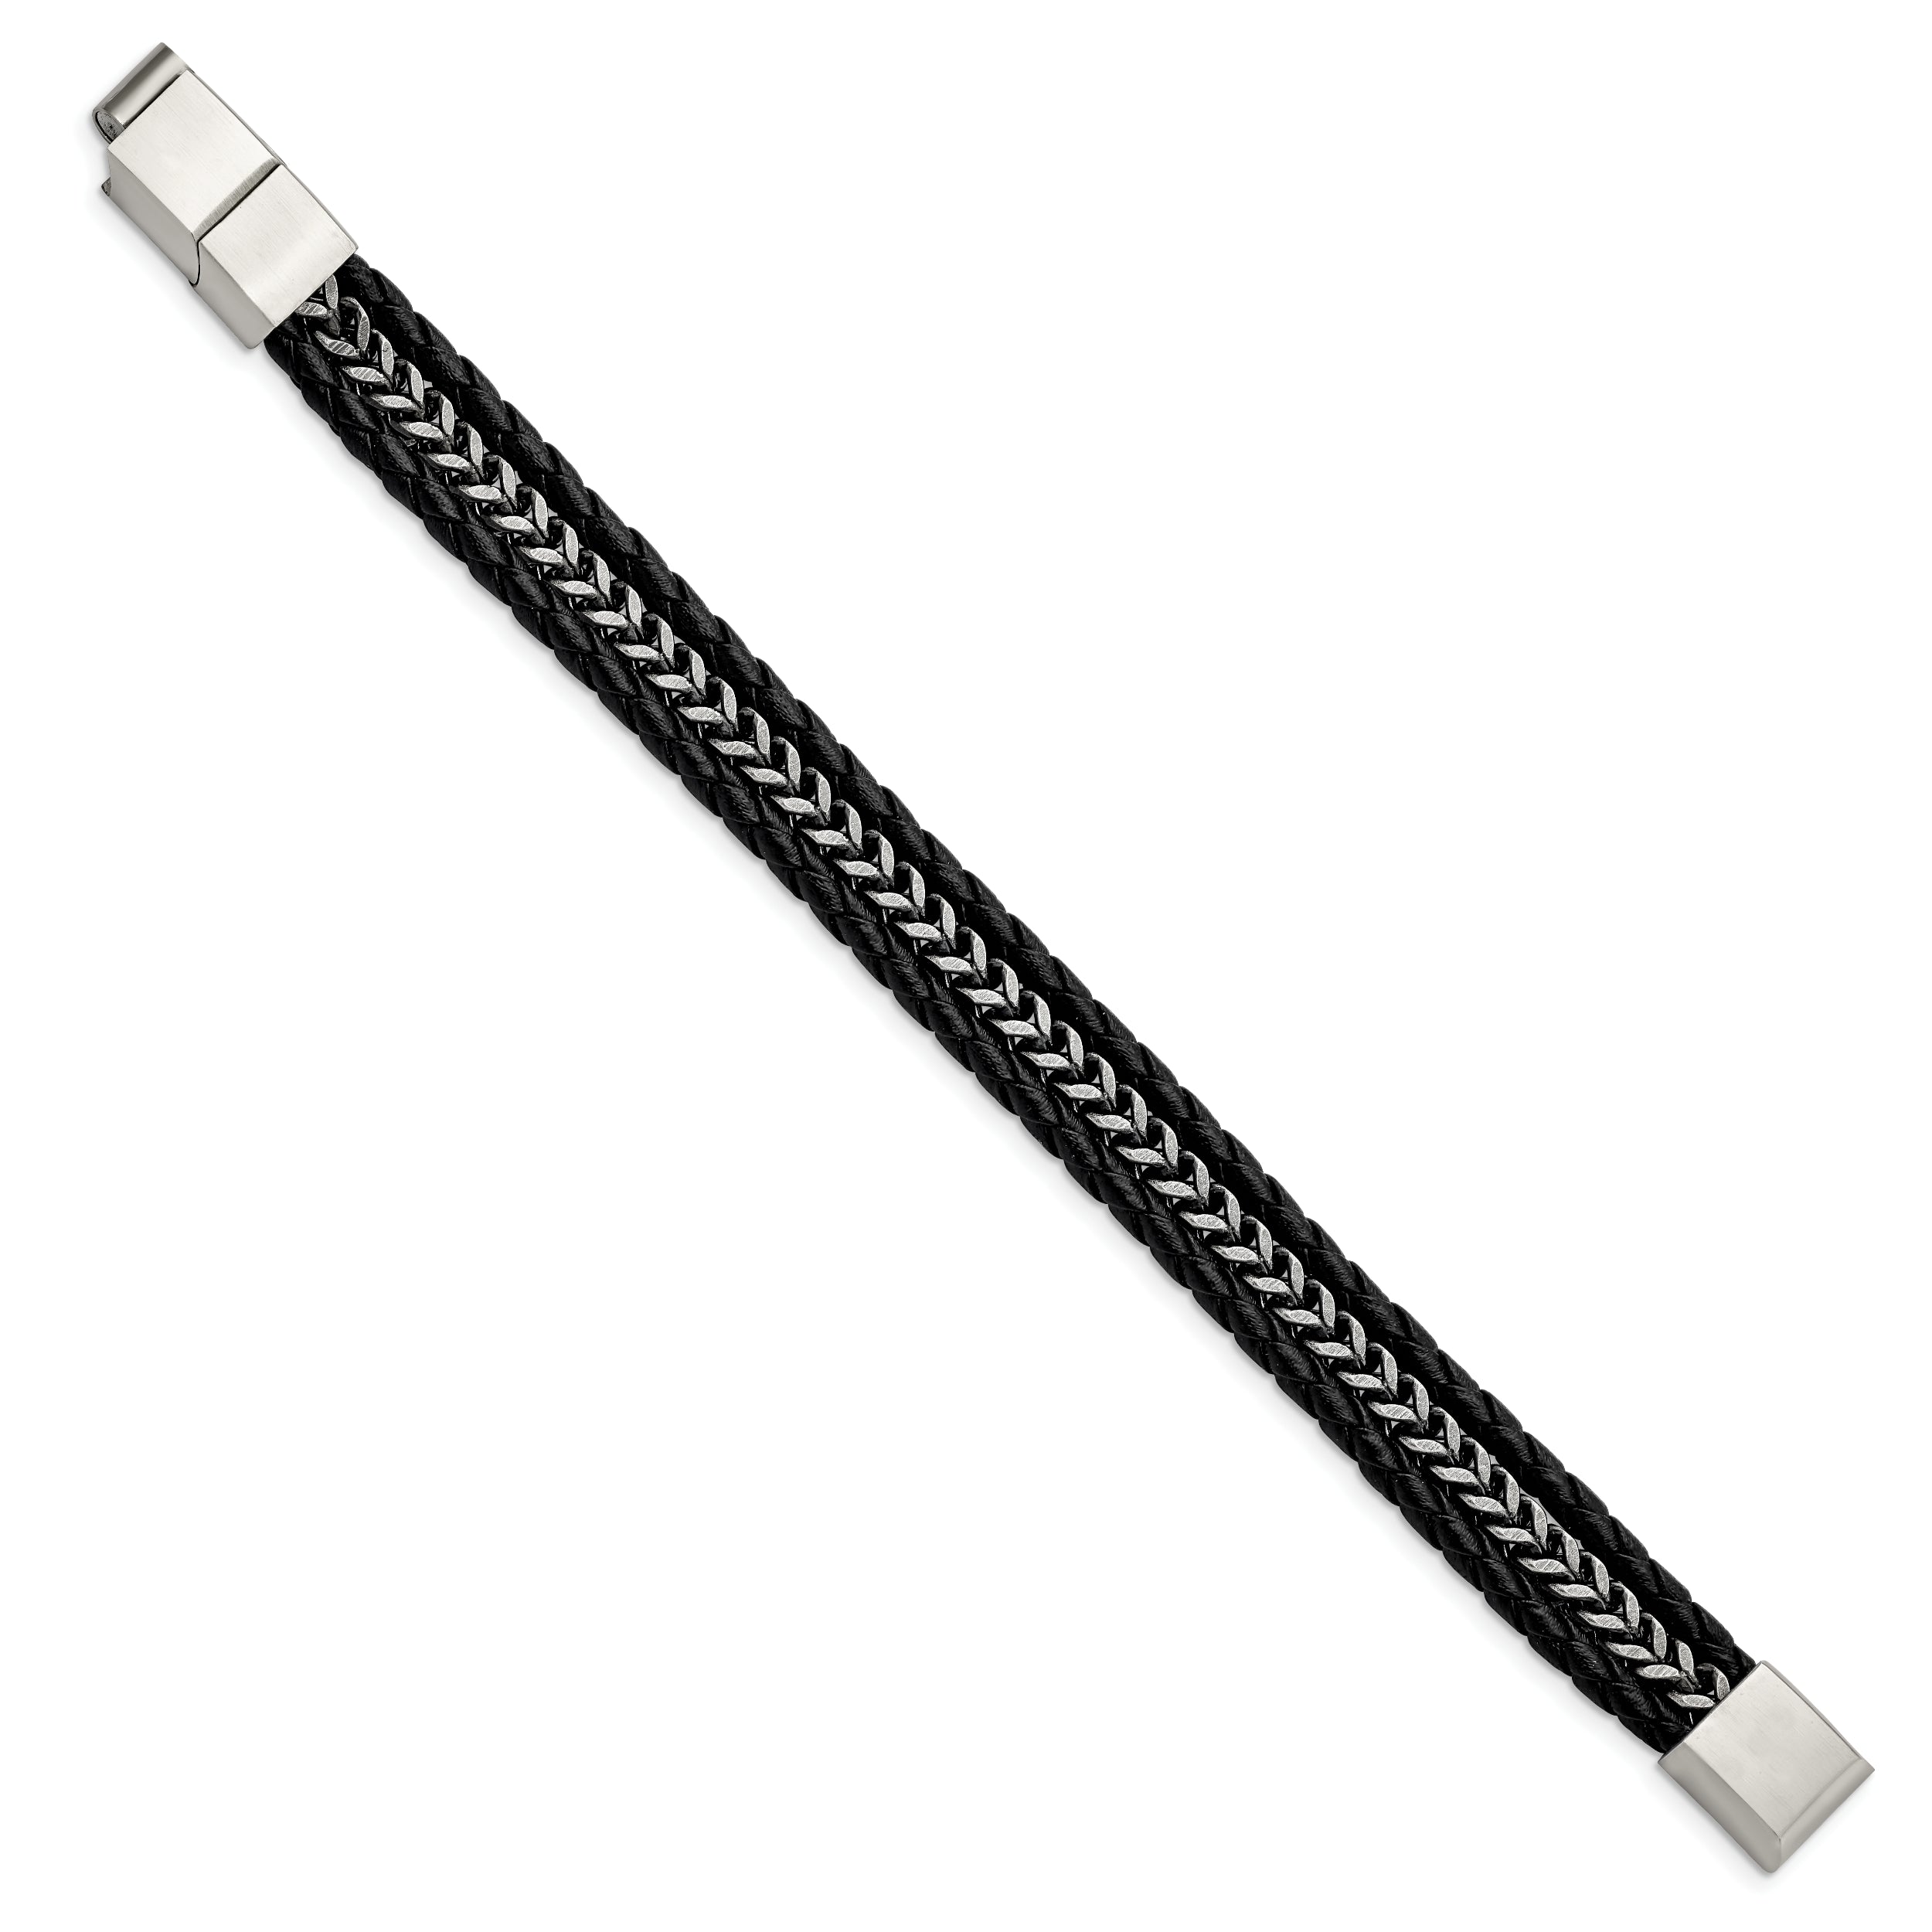 Chisel Stainless Steel Antiqued and Brushed Multi Strand Chain and Black Leather 8.25 inch Bracelet with .5 inch Extension